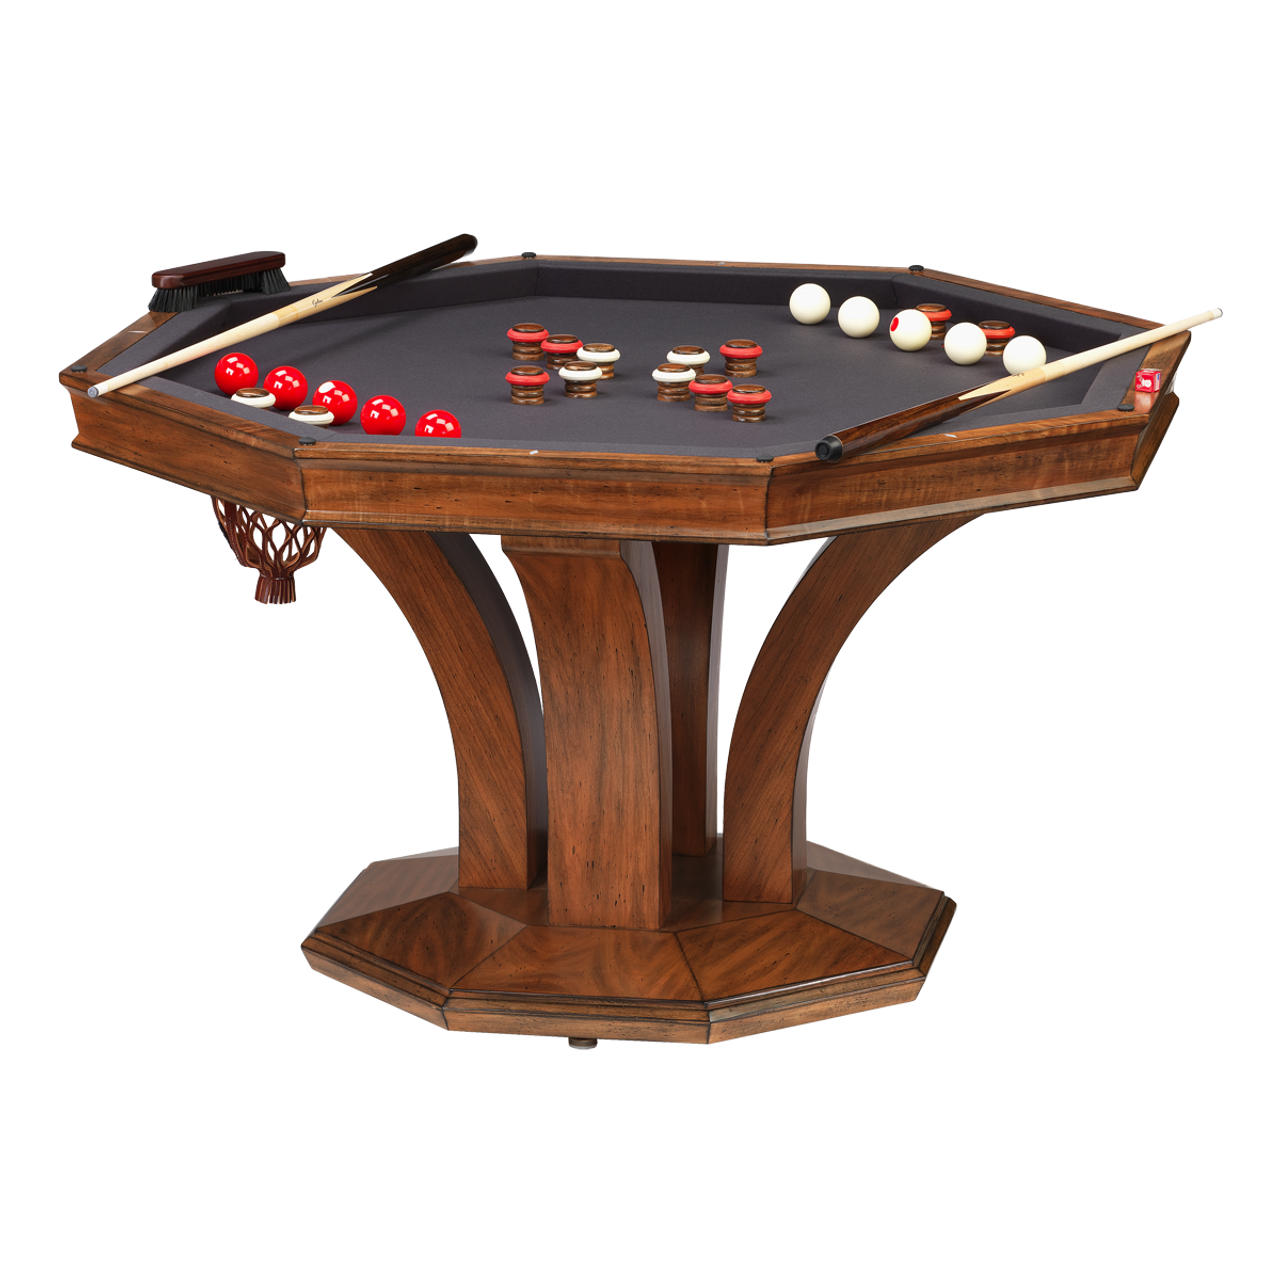 Darafeev Treviso Octagonal Poker Dining Game Table With Bumper Pool Free Local Delivery Gebhardtscom